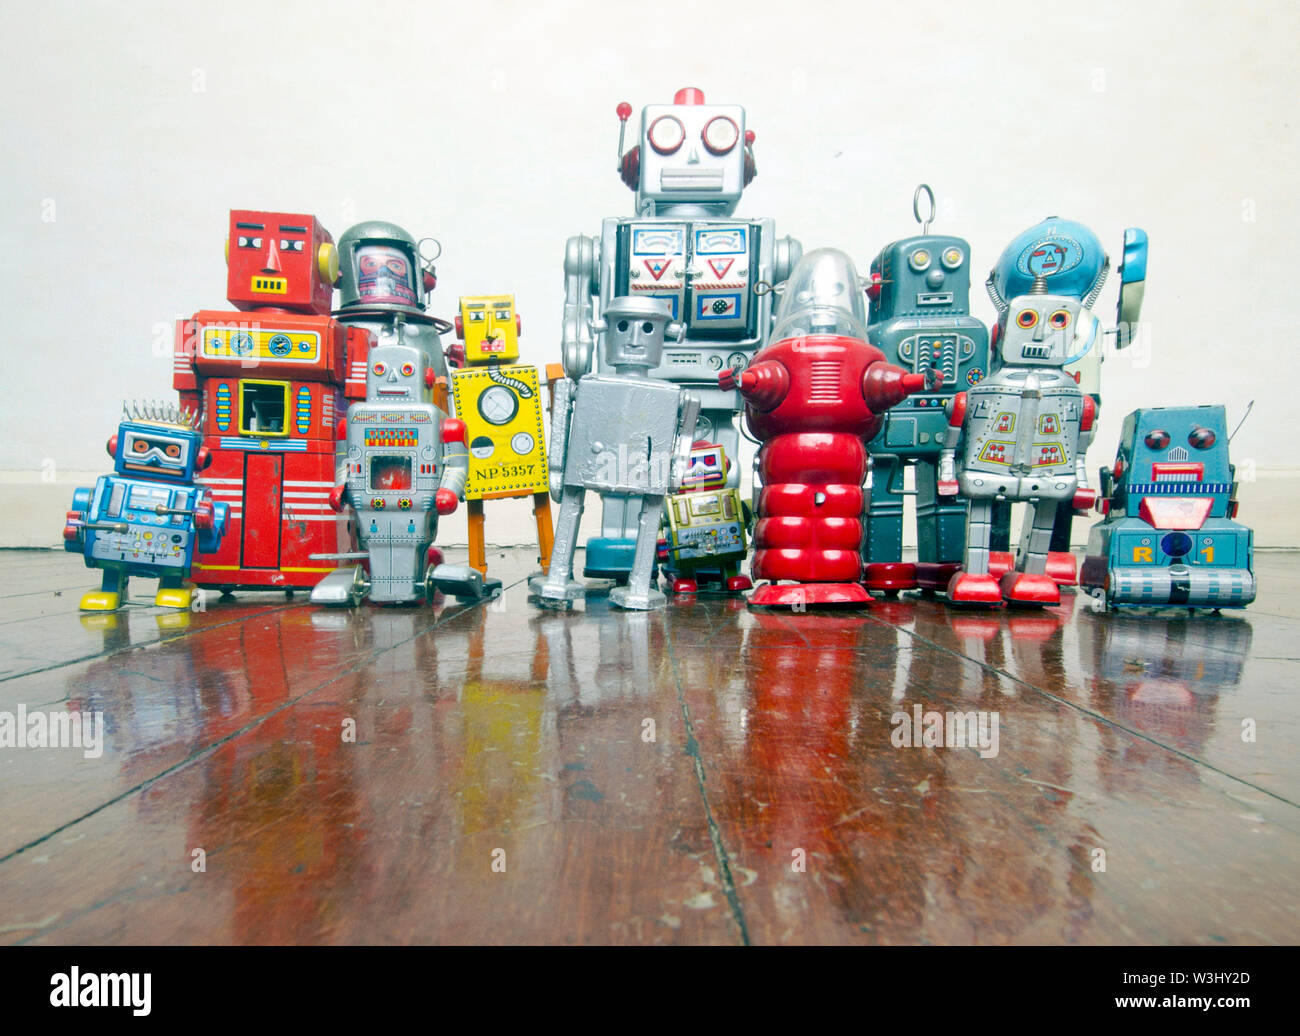 a big team of robots on an old wooden floor Stock Photo